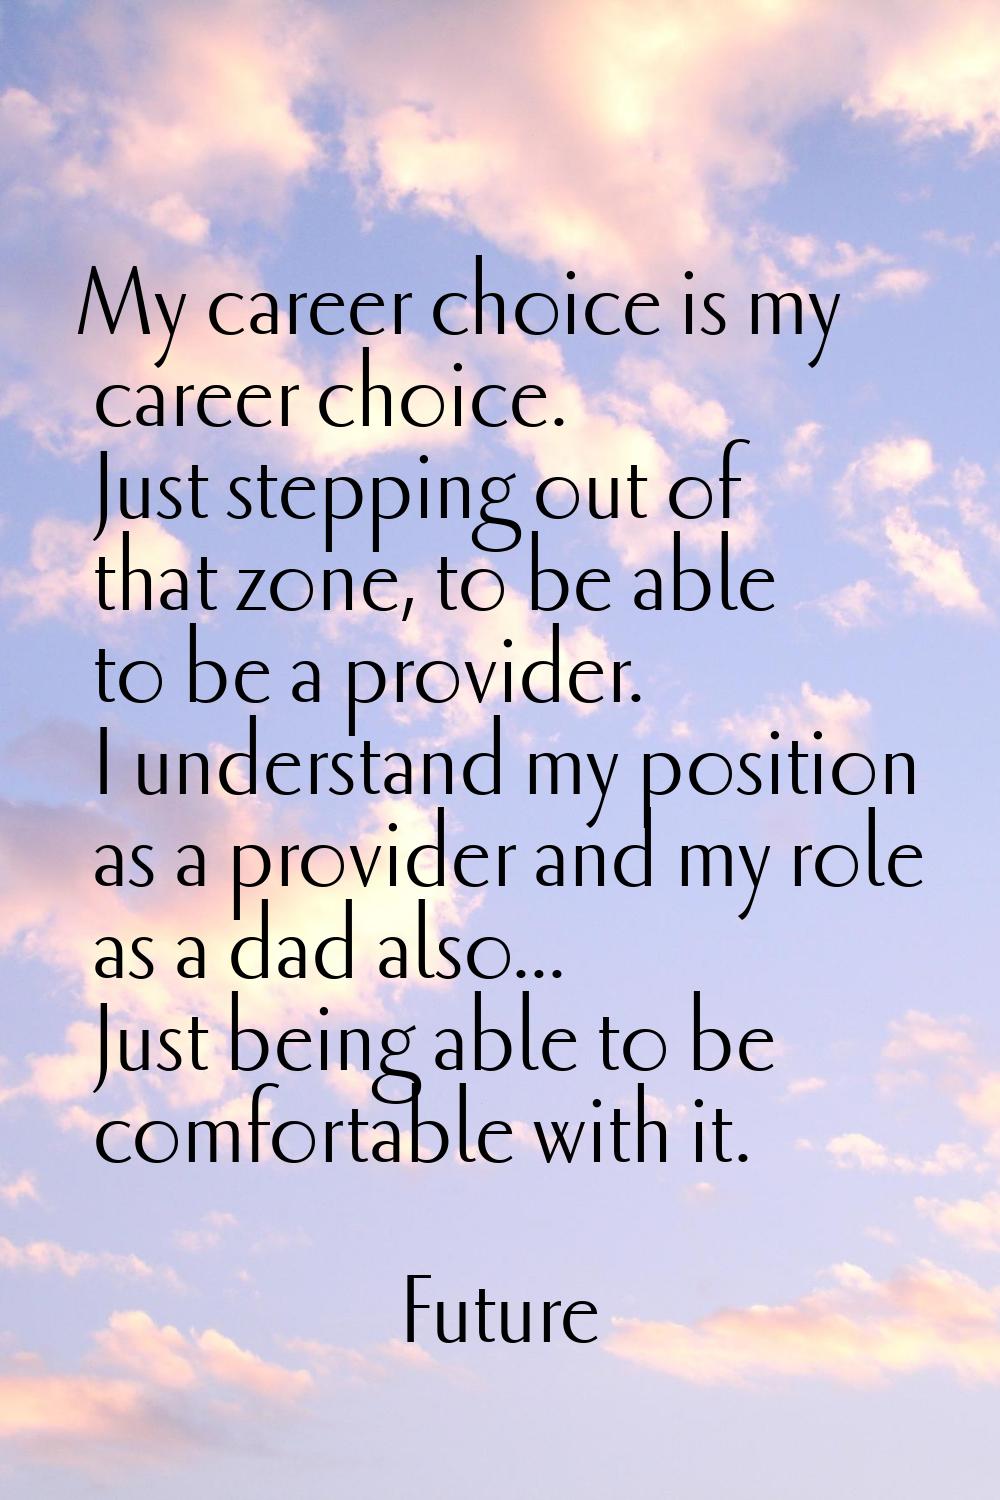 My career choice is my career choice. Just stepping out of that zone, to be able to be a provider. 